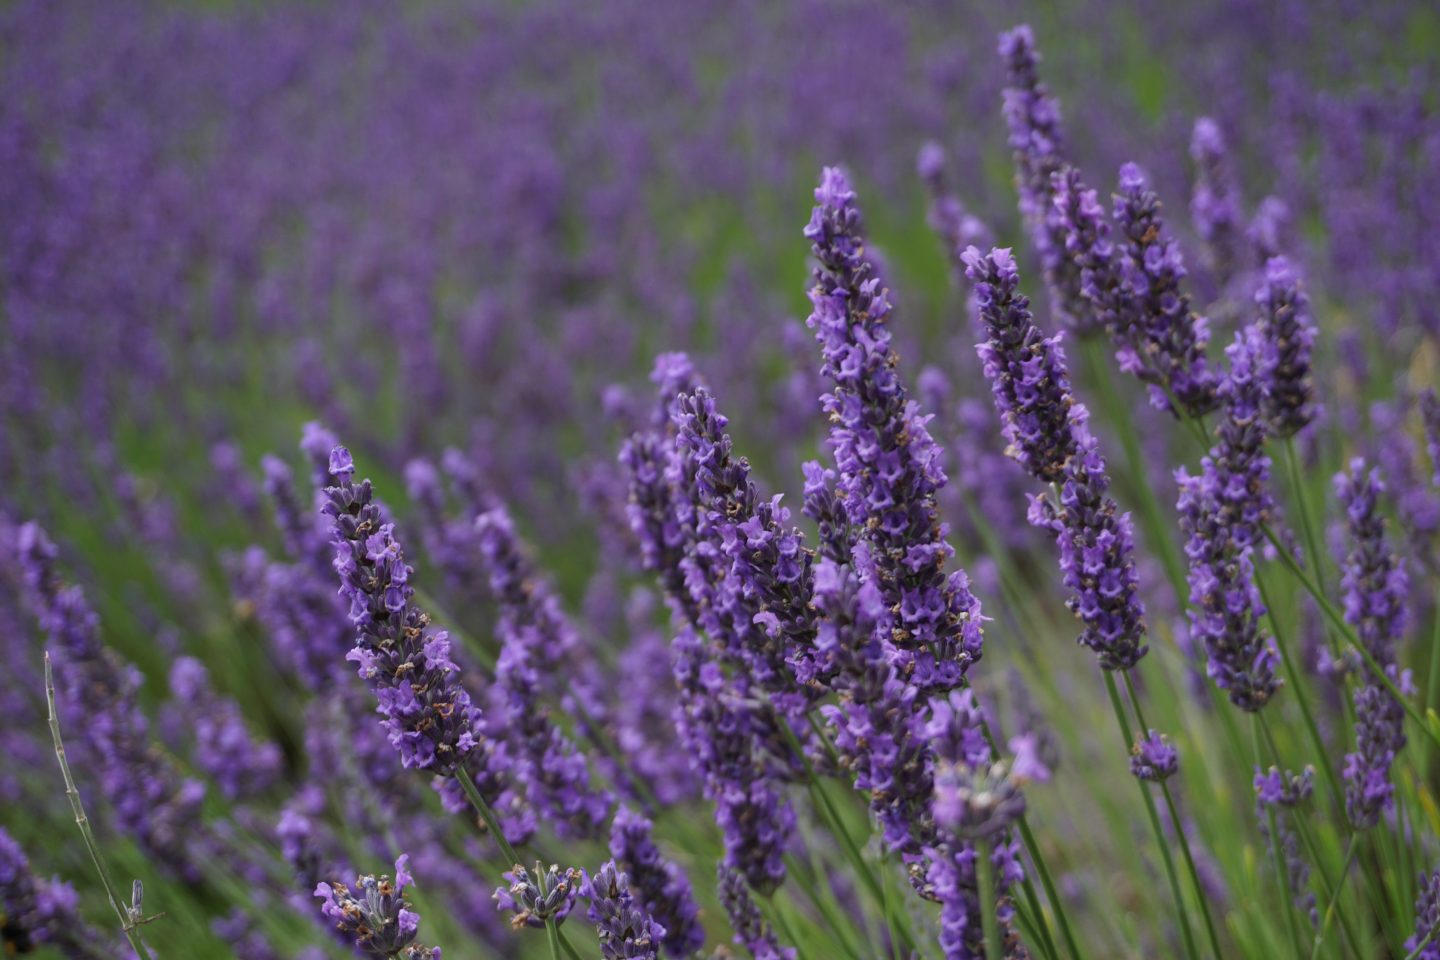 Lavender in foreground in focus with lavender in the distance out of focus